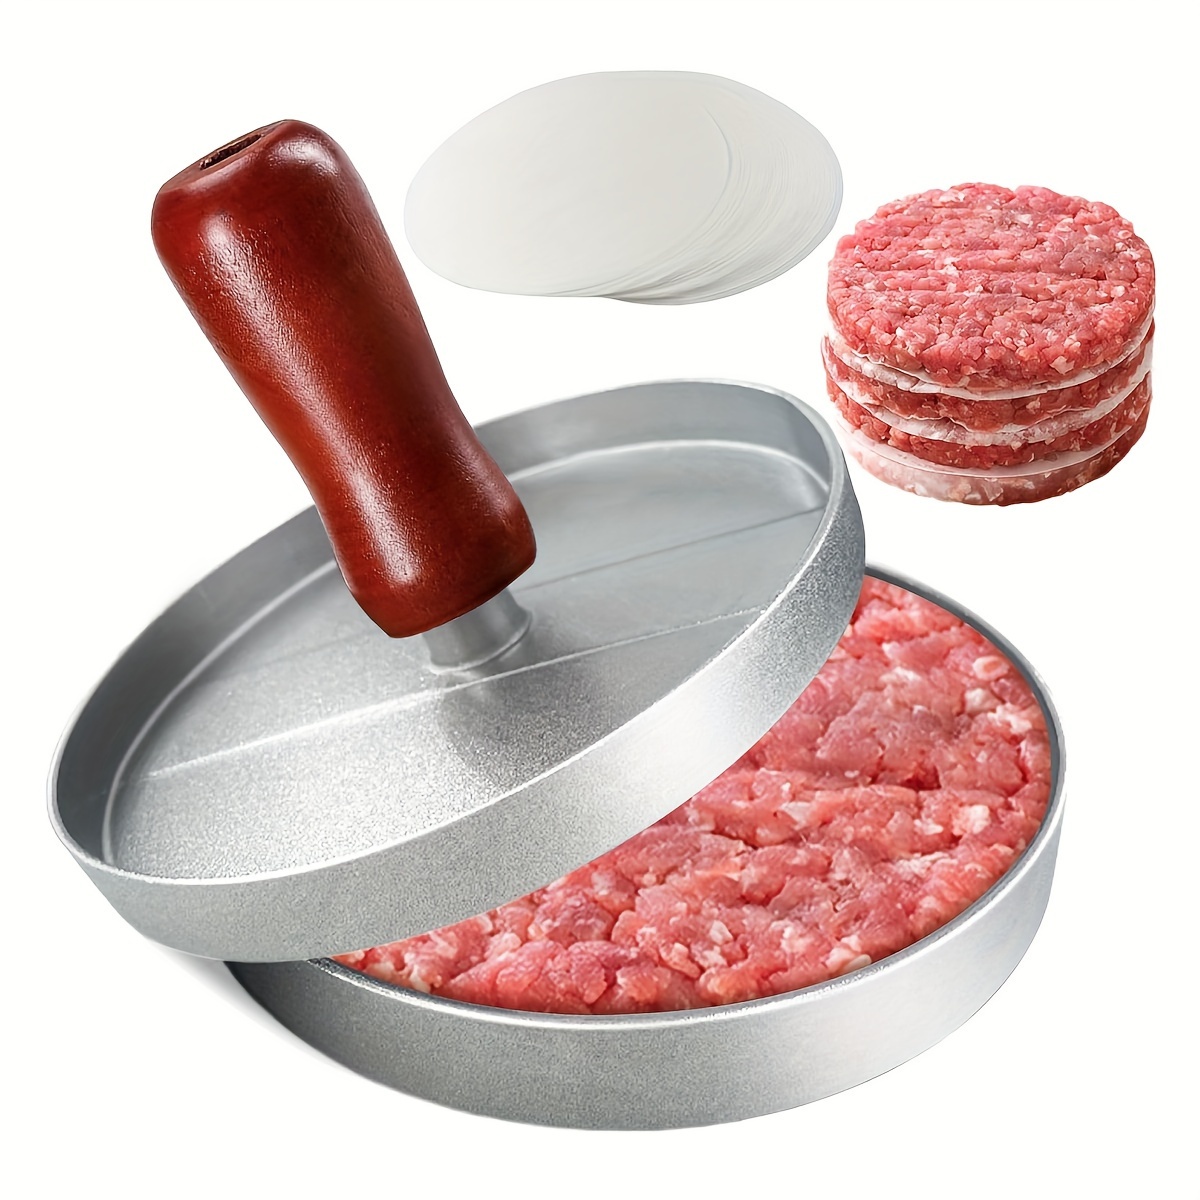 

1set Burger Press 100 Patty Papers Set Non-stick Hamburger Press Patty Maker Mold With Free Wax Patty Paper Sheets | Meat Beef Cheese Veggie Burger Maker For Grill Griddle Bbq Barbecue